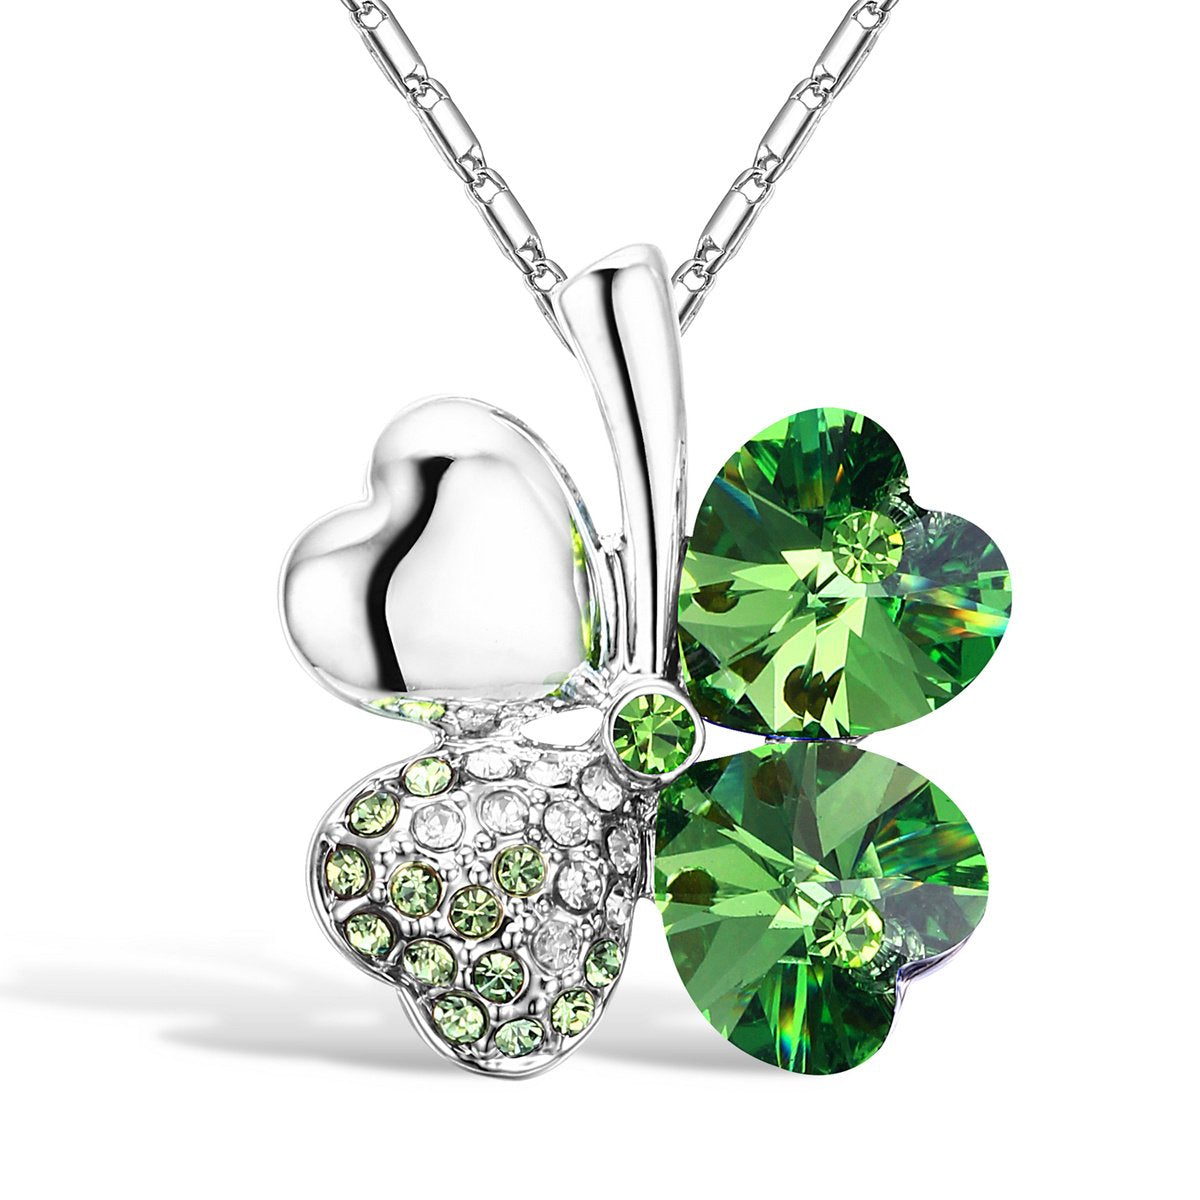 Shop Green Four Leaf Clover Necklace For Women with great